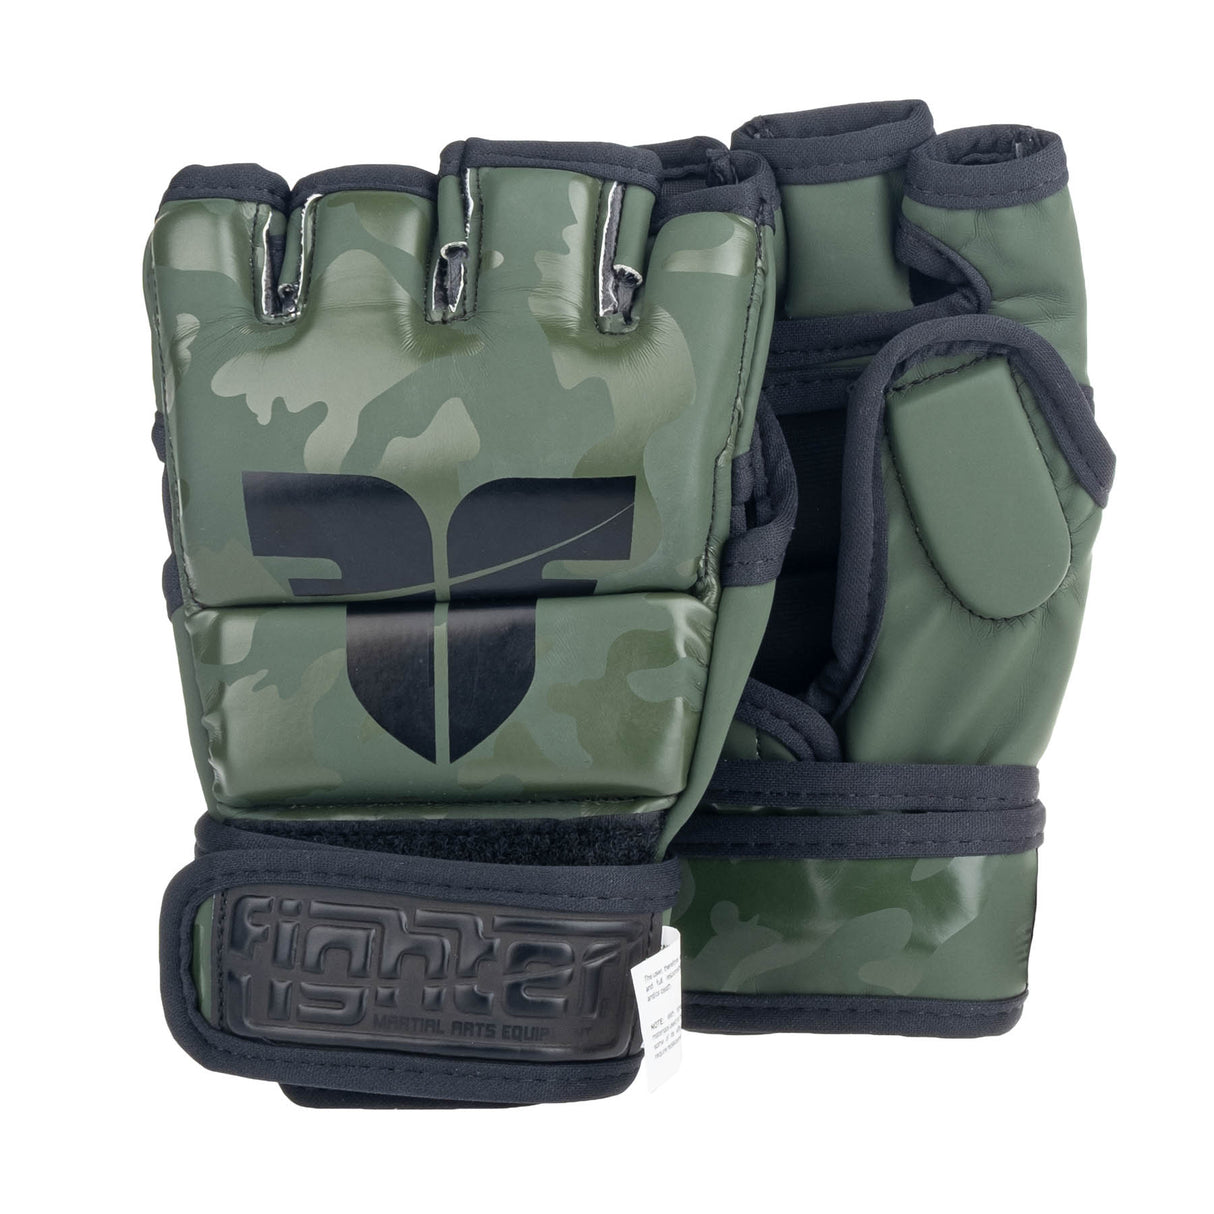 Fighter MMA Handschuhe Competition - khaki camo, FMG-002CKH